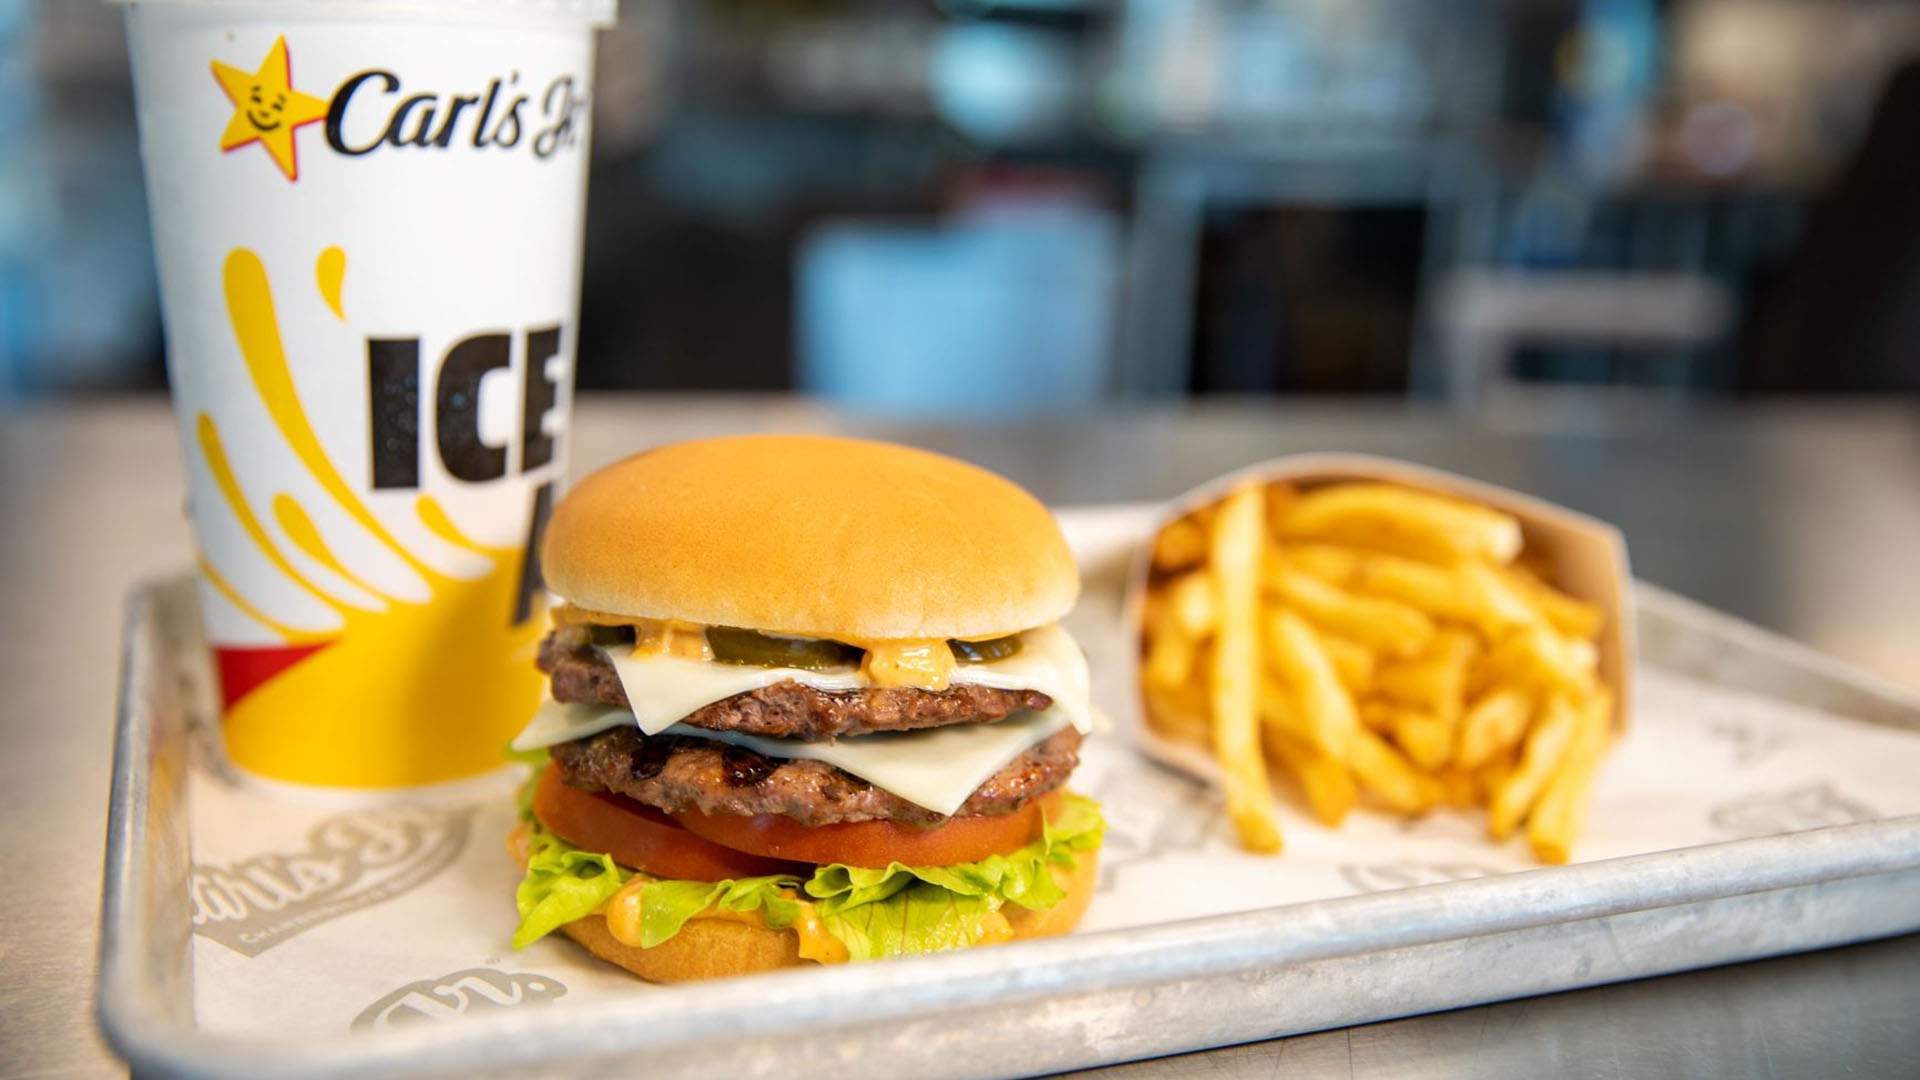 American Burger Joint Carl's Jr Is Launching Its First Sydney Store